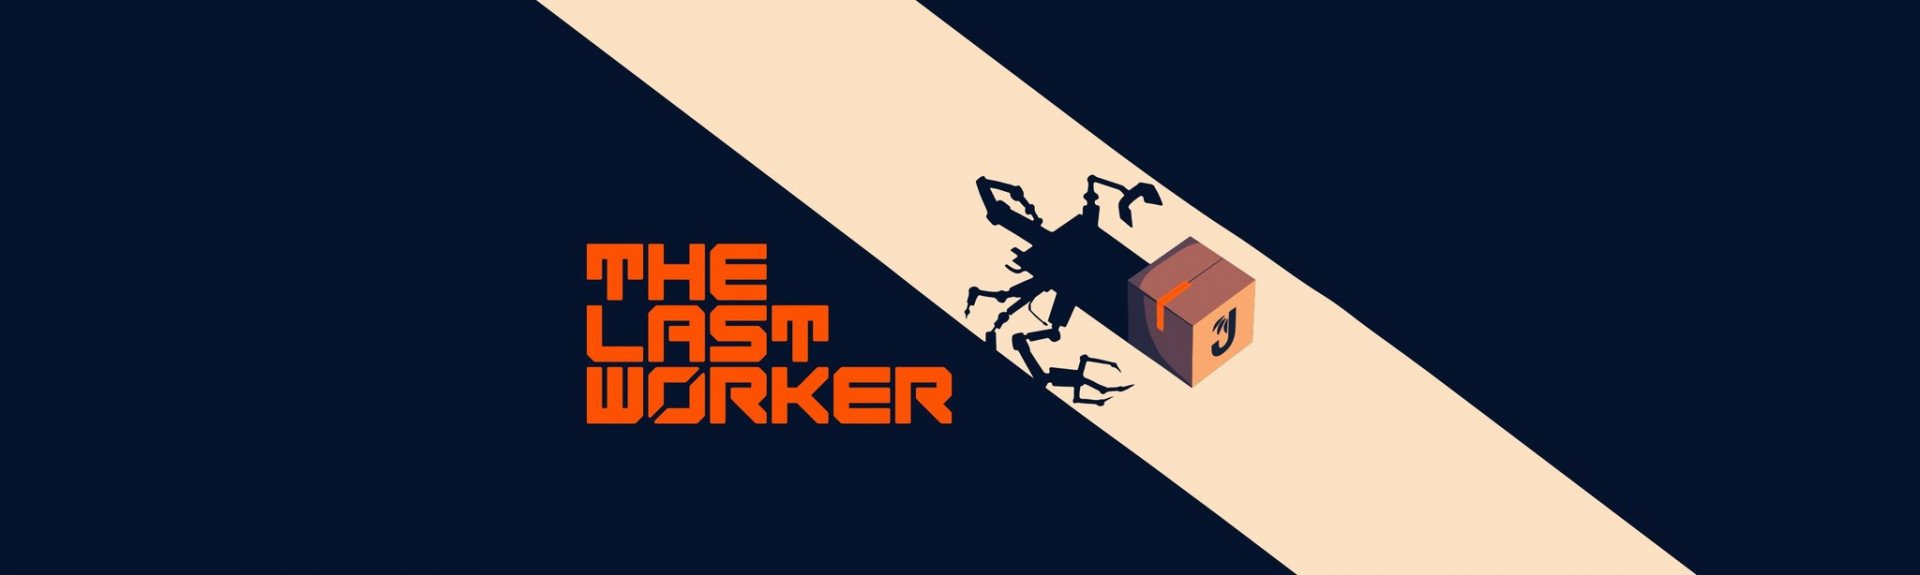 The Last Worker: ANÁLISIS